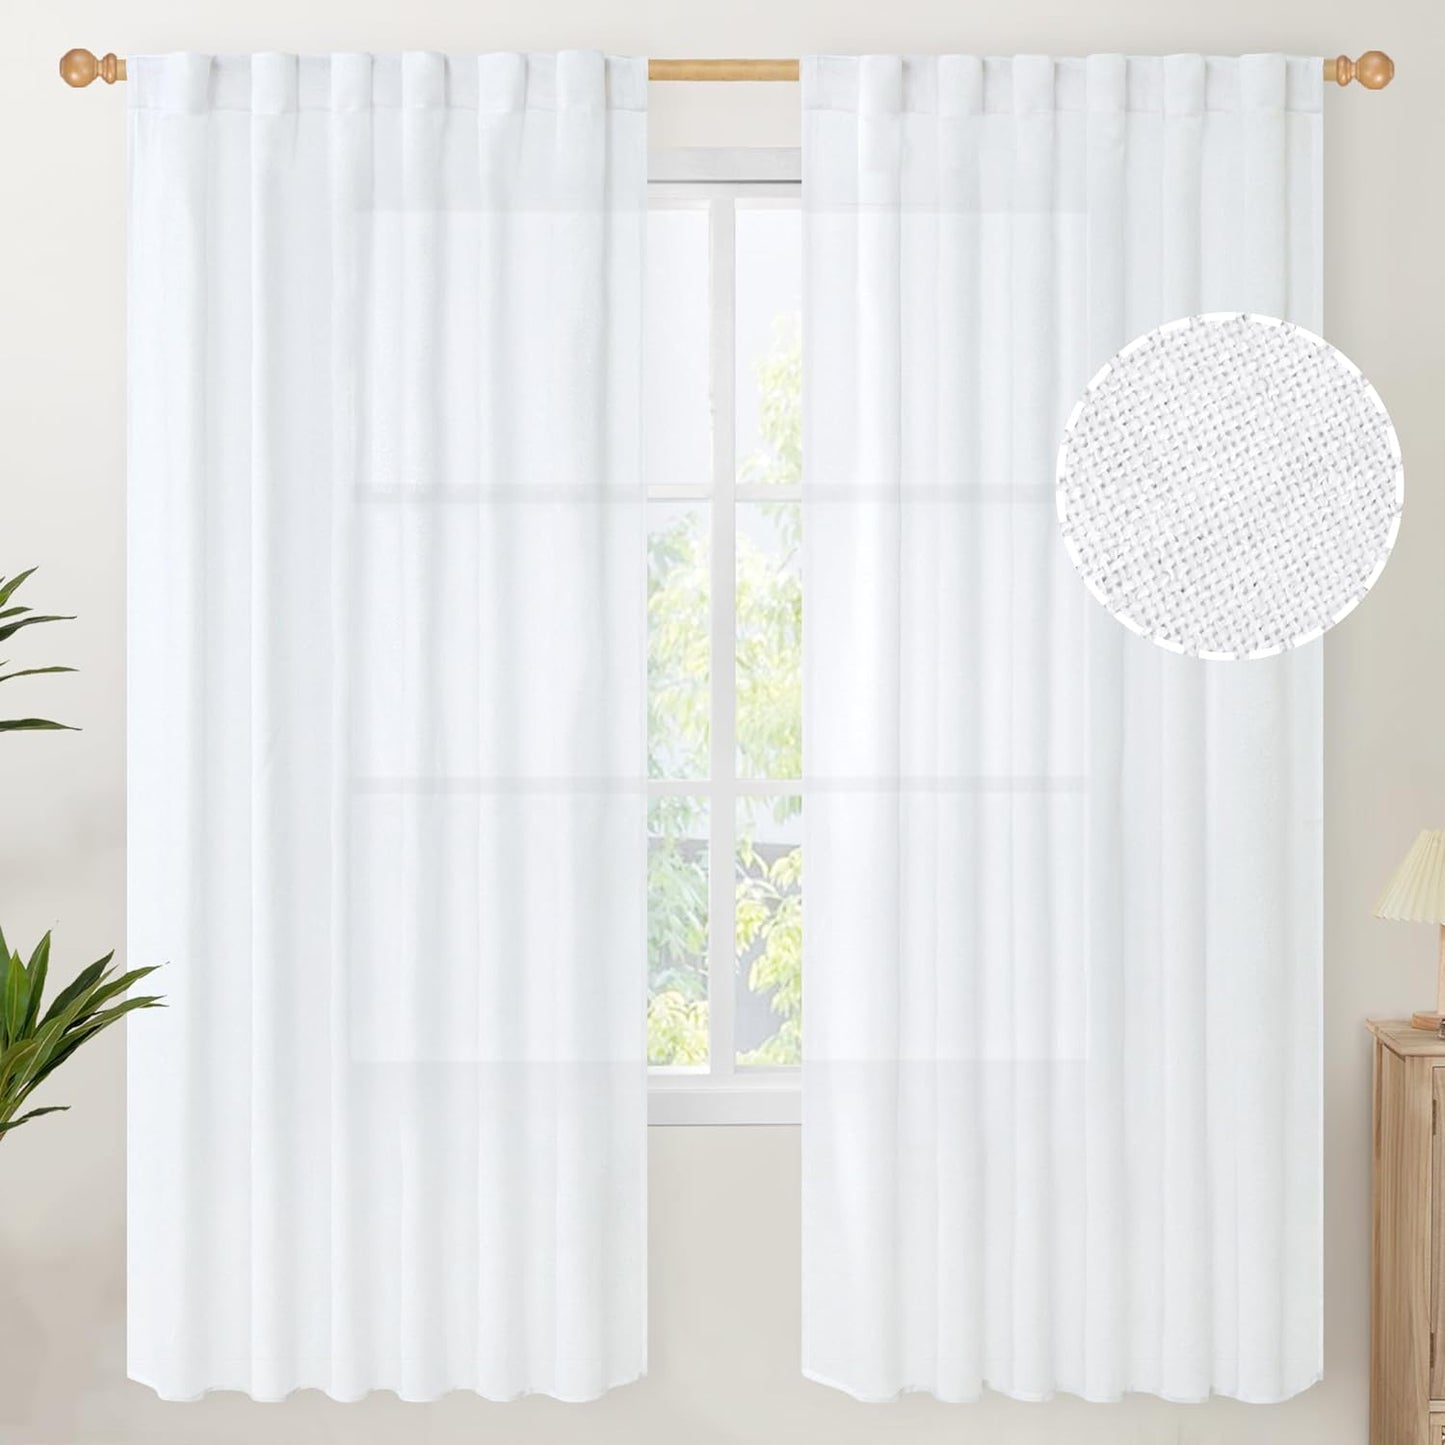 Youngstex Natural Linen Curtains 72 Inch Length 2 Panels for Living Room Light Filtering Textured Window Drapes for Bedroom Dining Office Back Tab Rod Pocket, 52 X 72 Inch  YoungsTex White 52W X 72L 